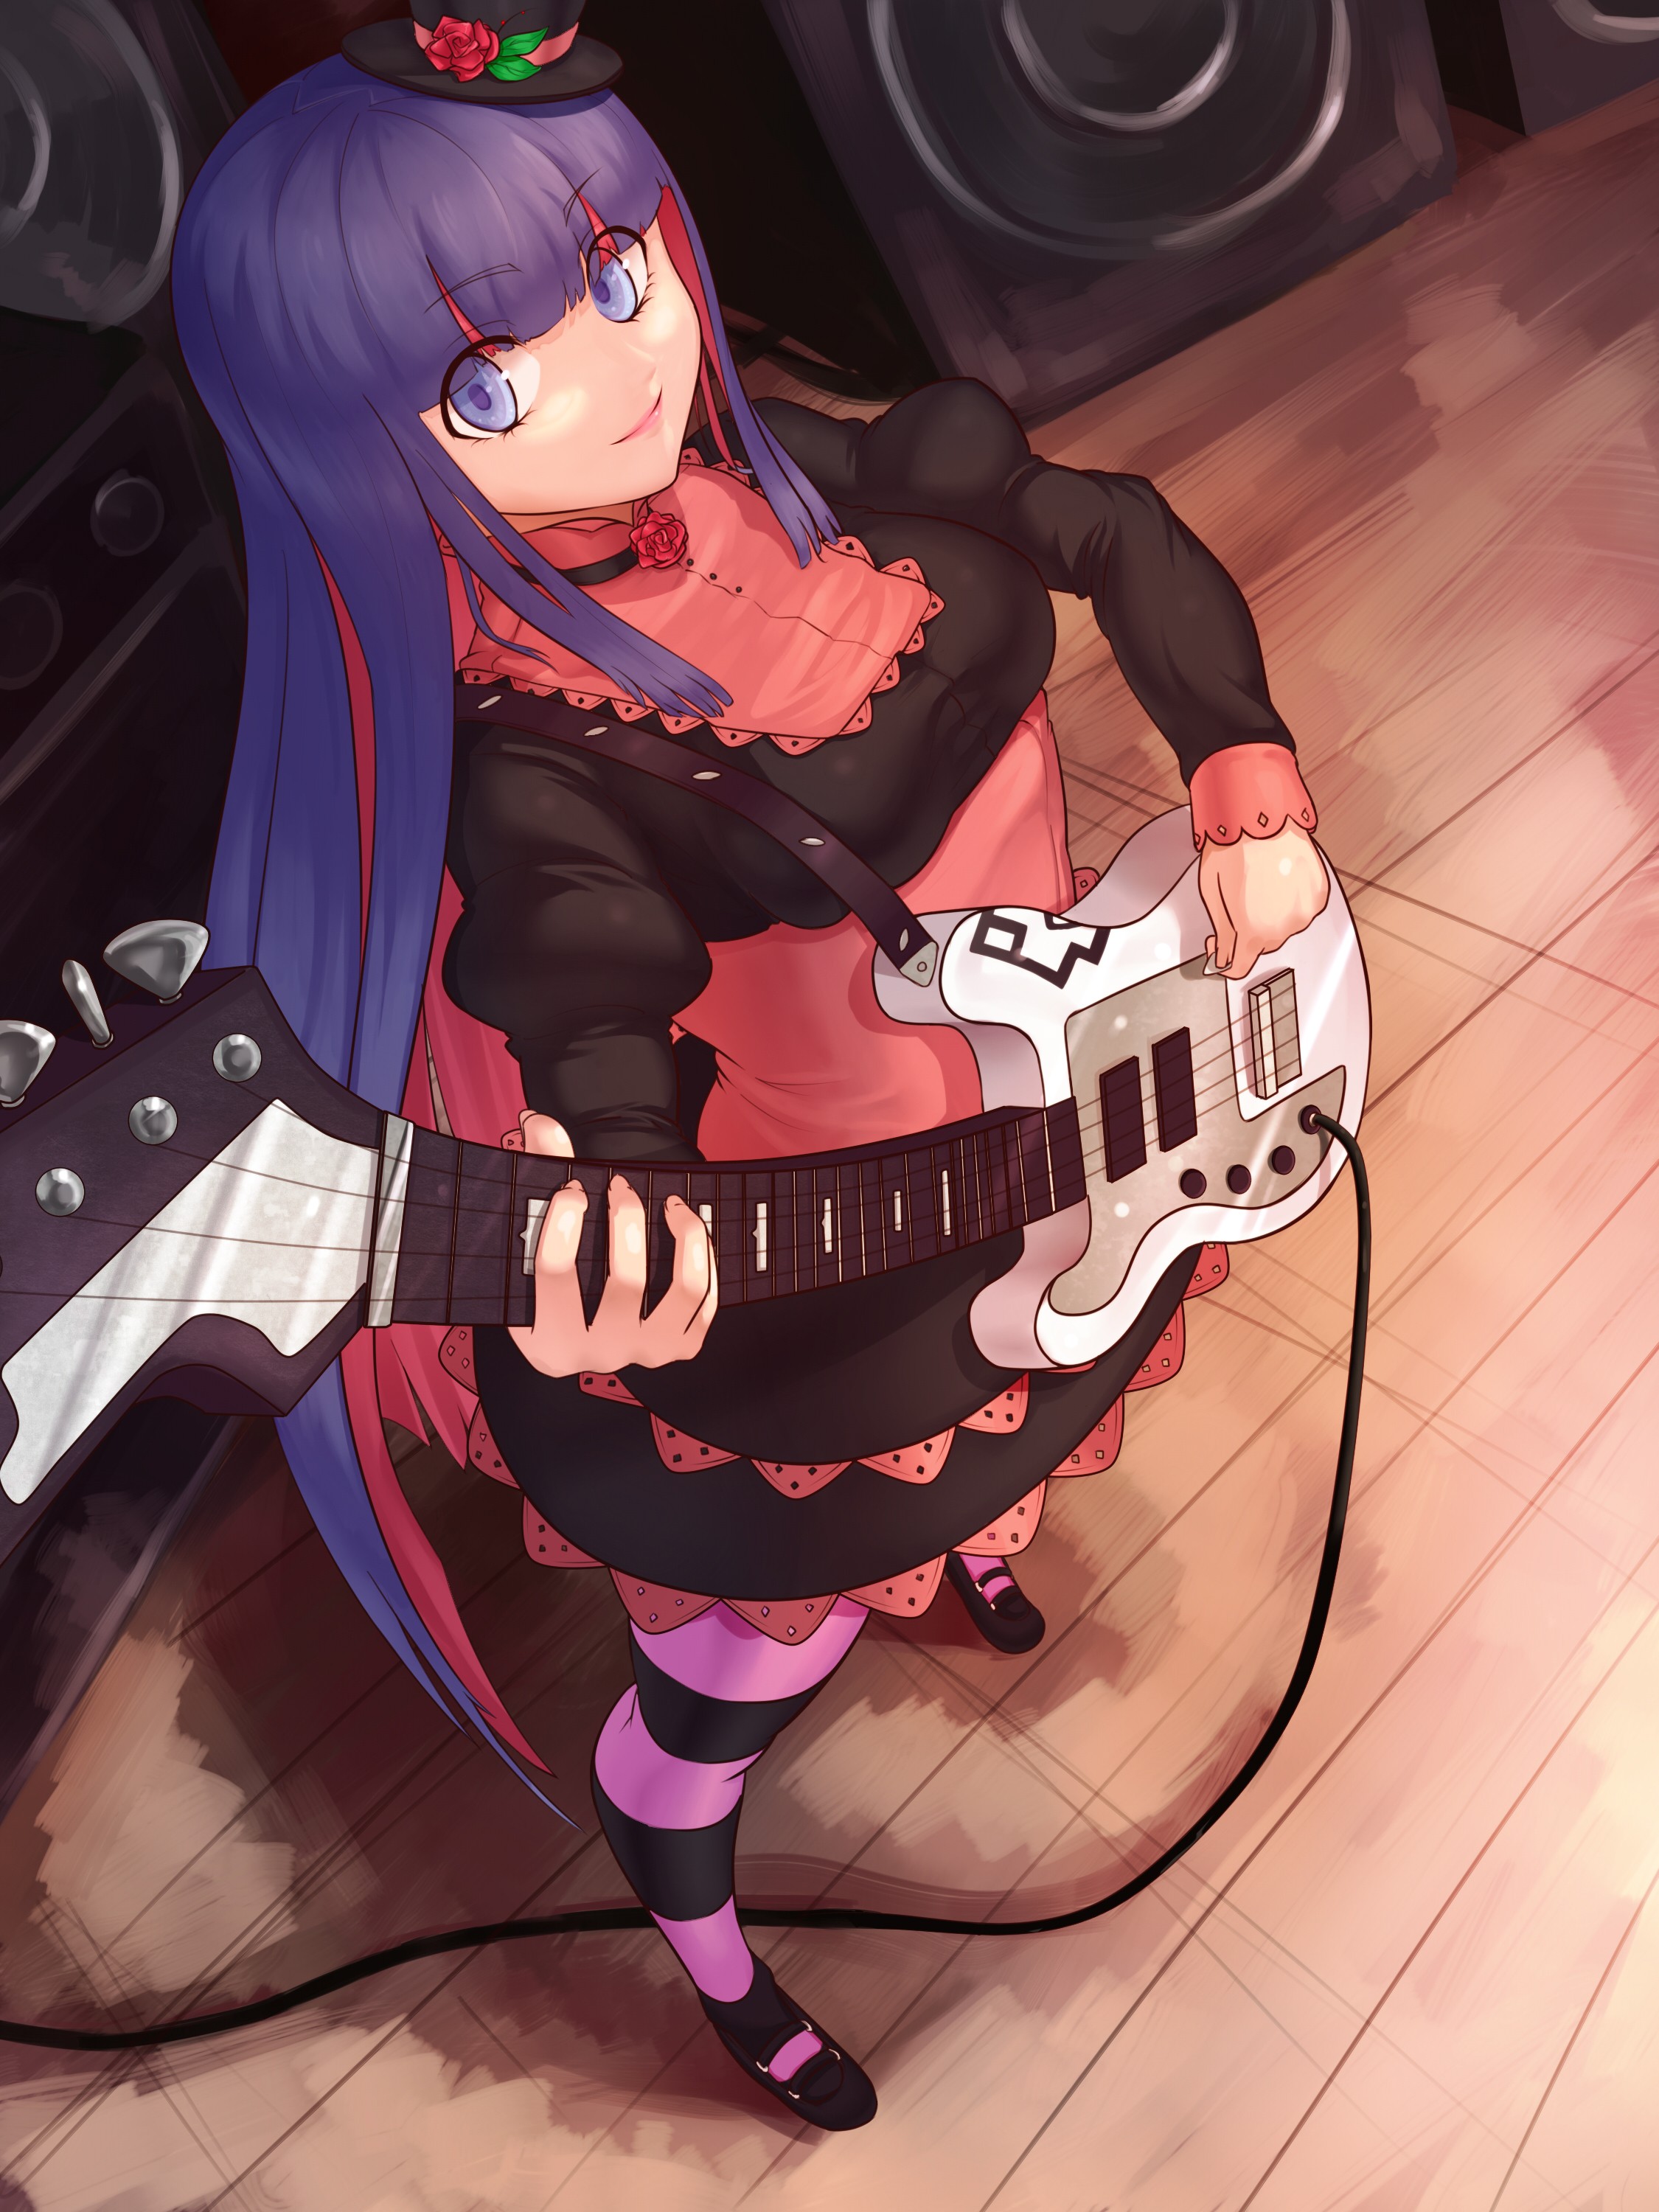 Anime 2250x3000 anime Panty and Stocking with Garterbelt electric guitar Anarchy Stocking musical instrument anime girls